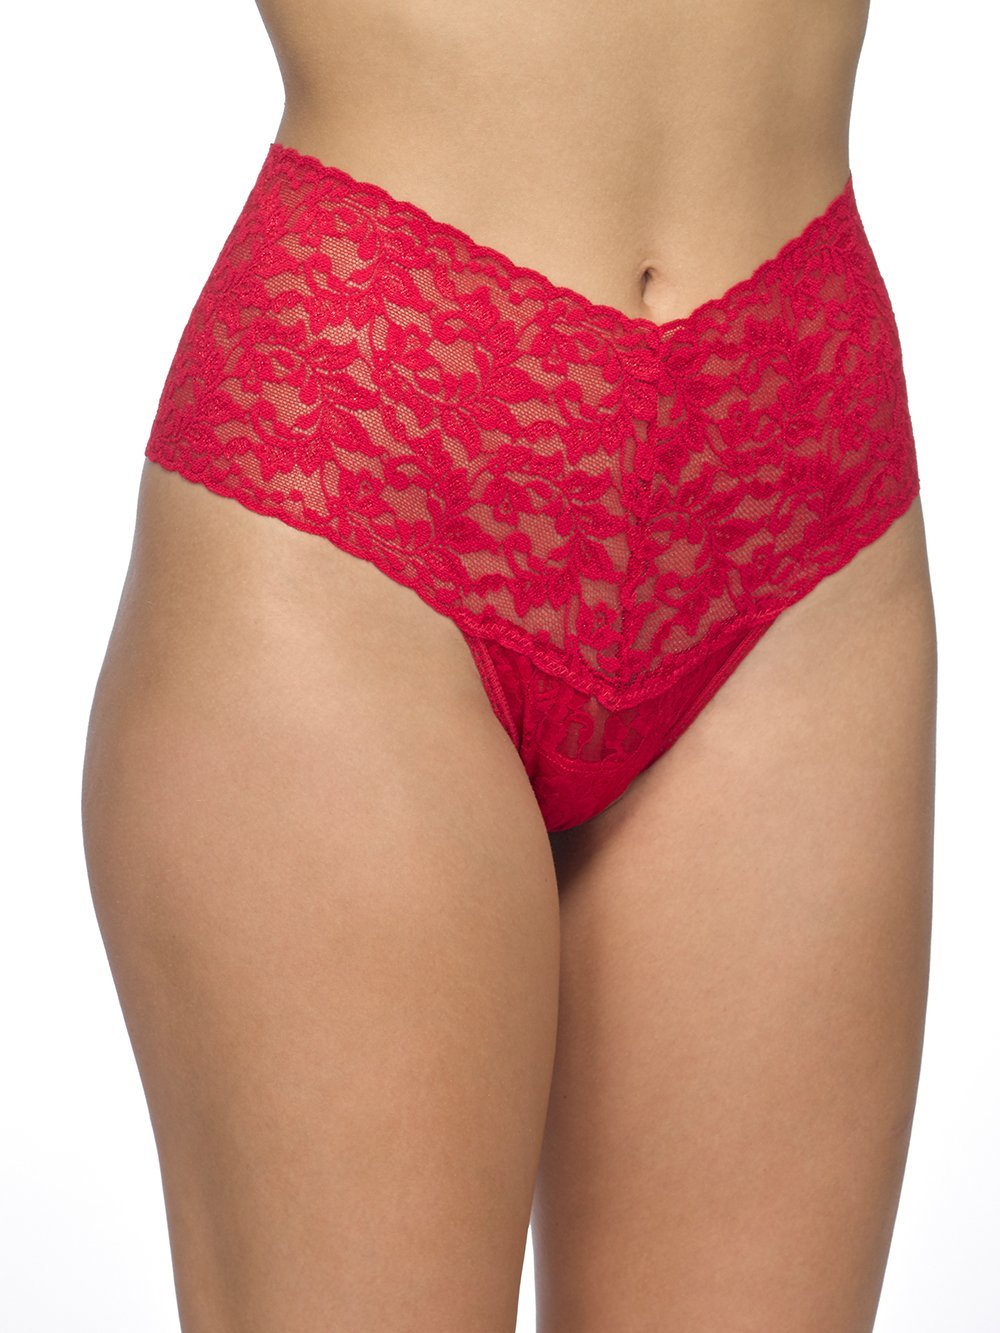 Hanky Panky Thong Red / One Size Retro Lace Thong